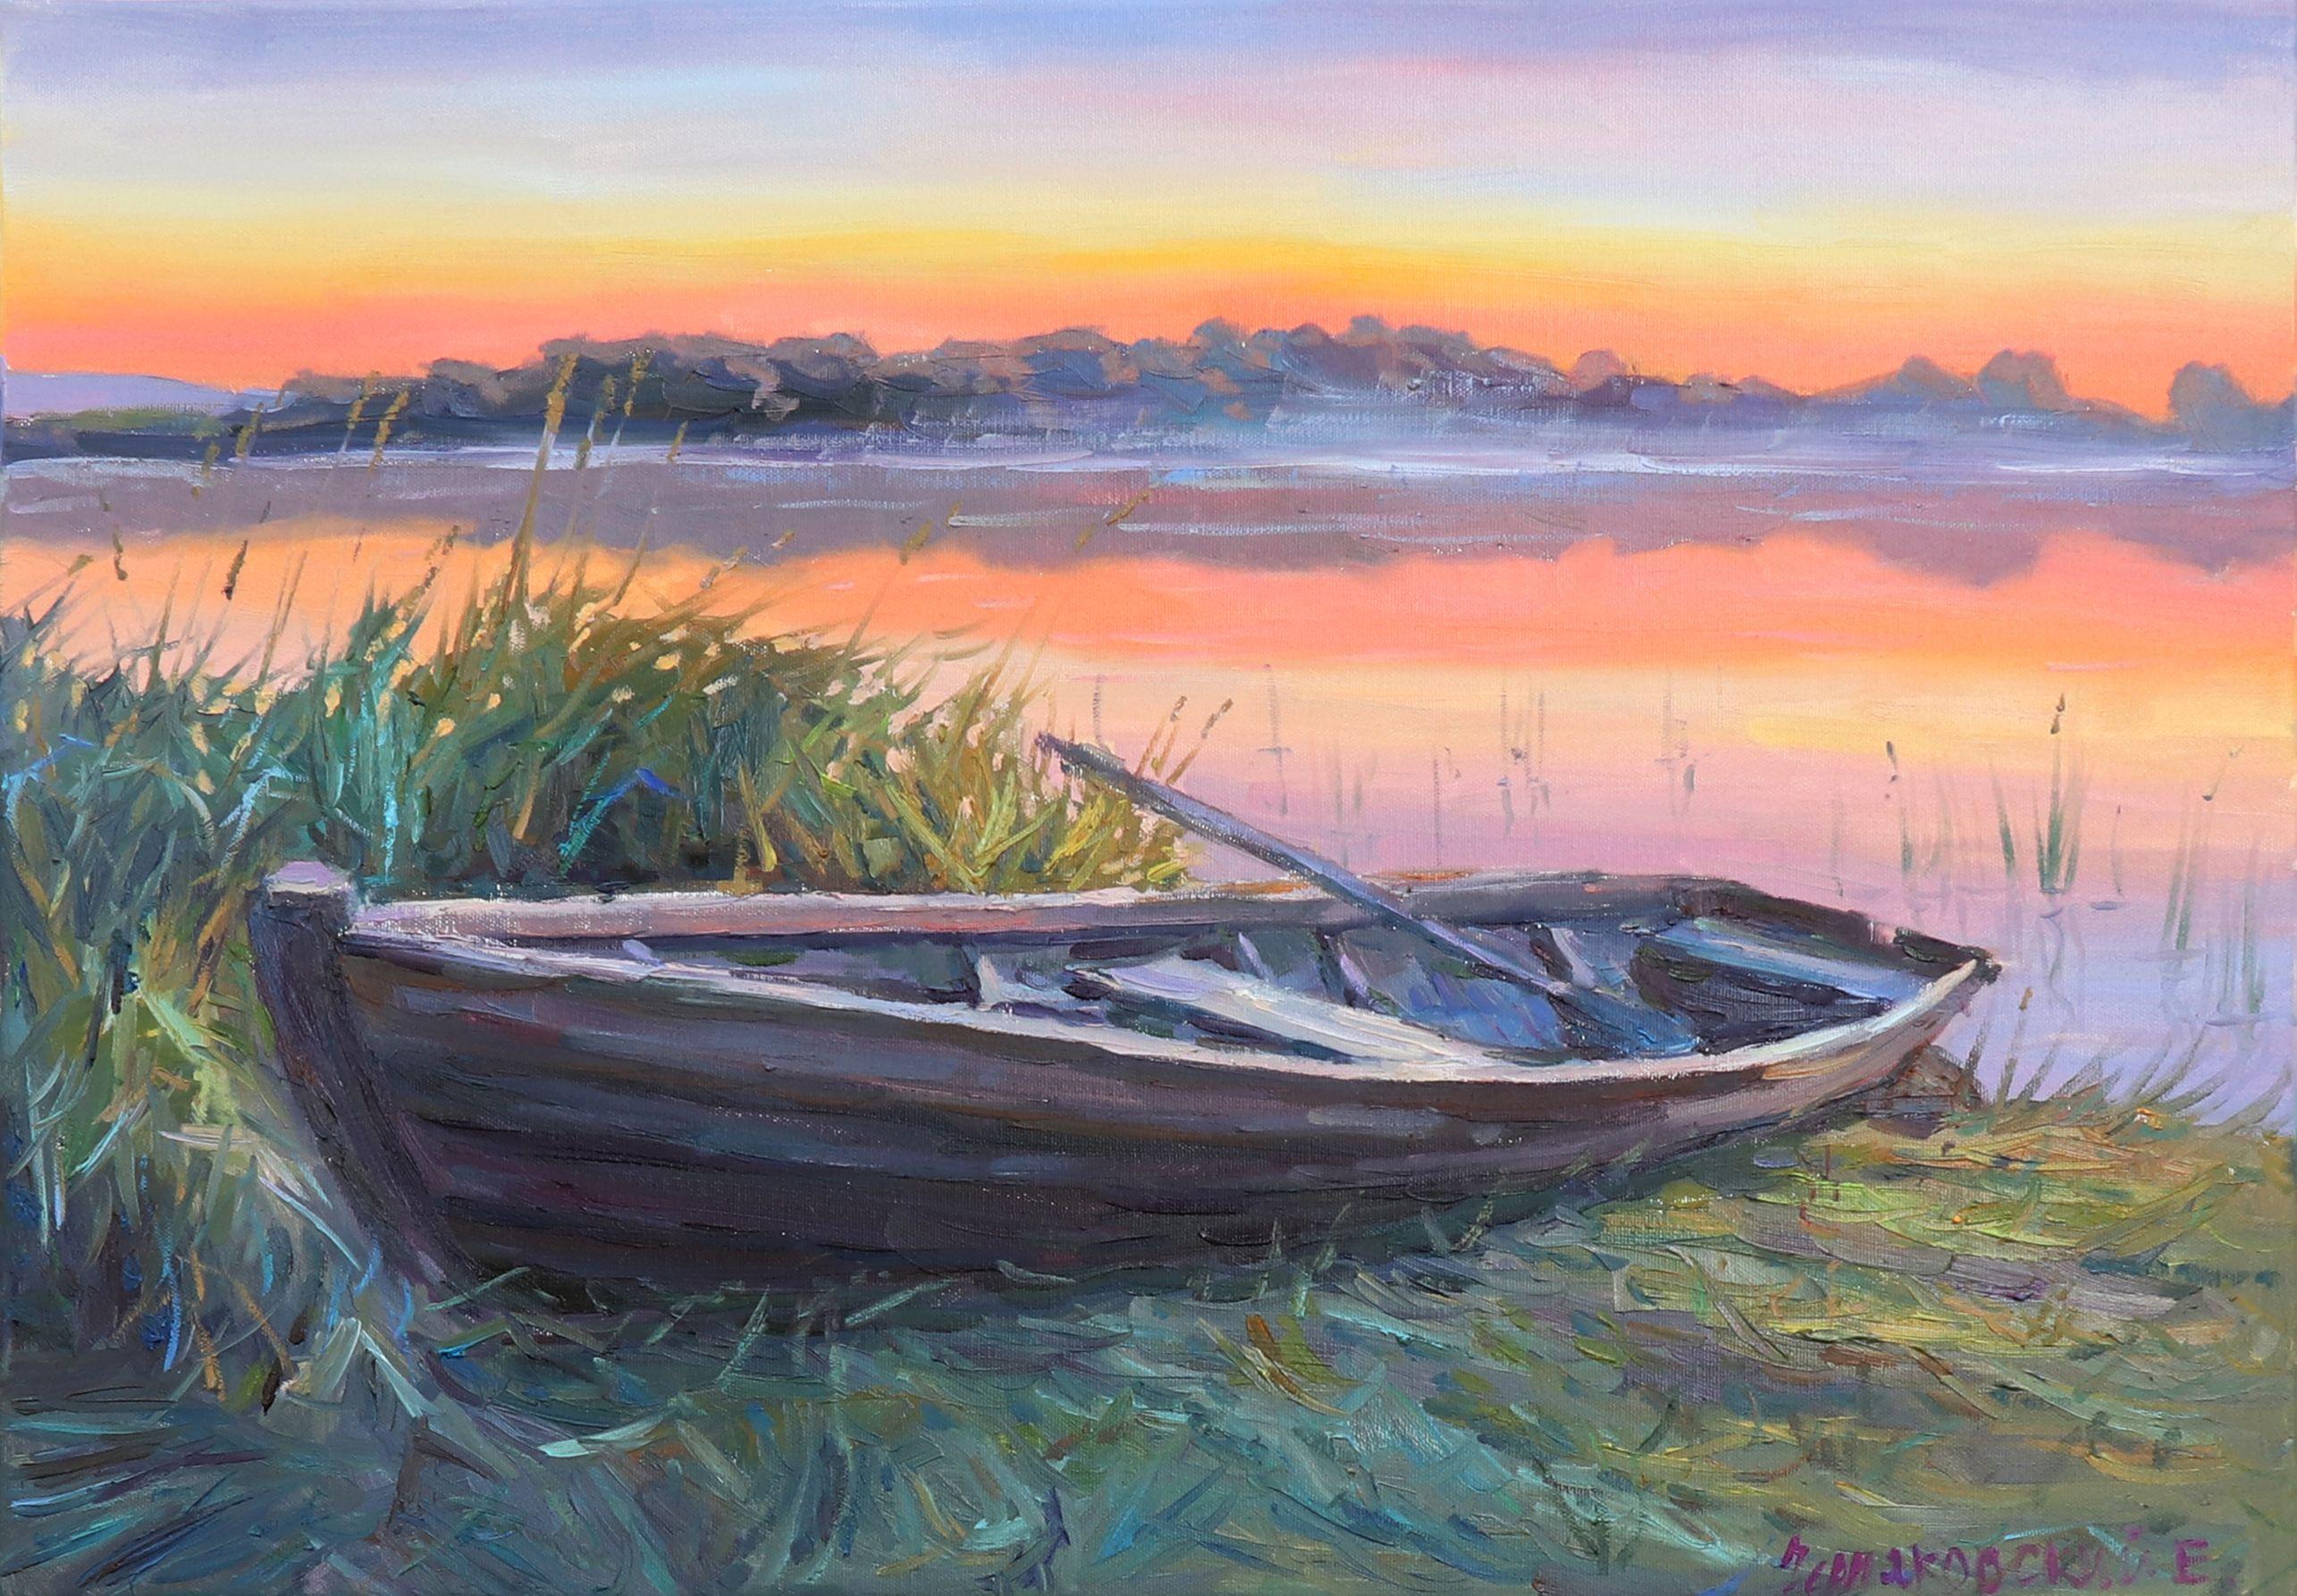 Boat, Painting, Oil on Canvas